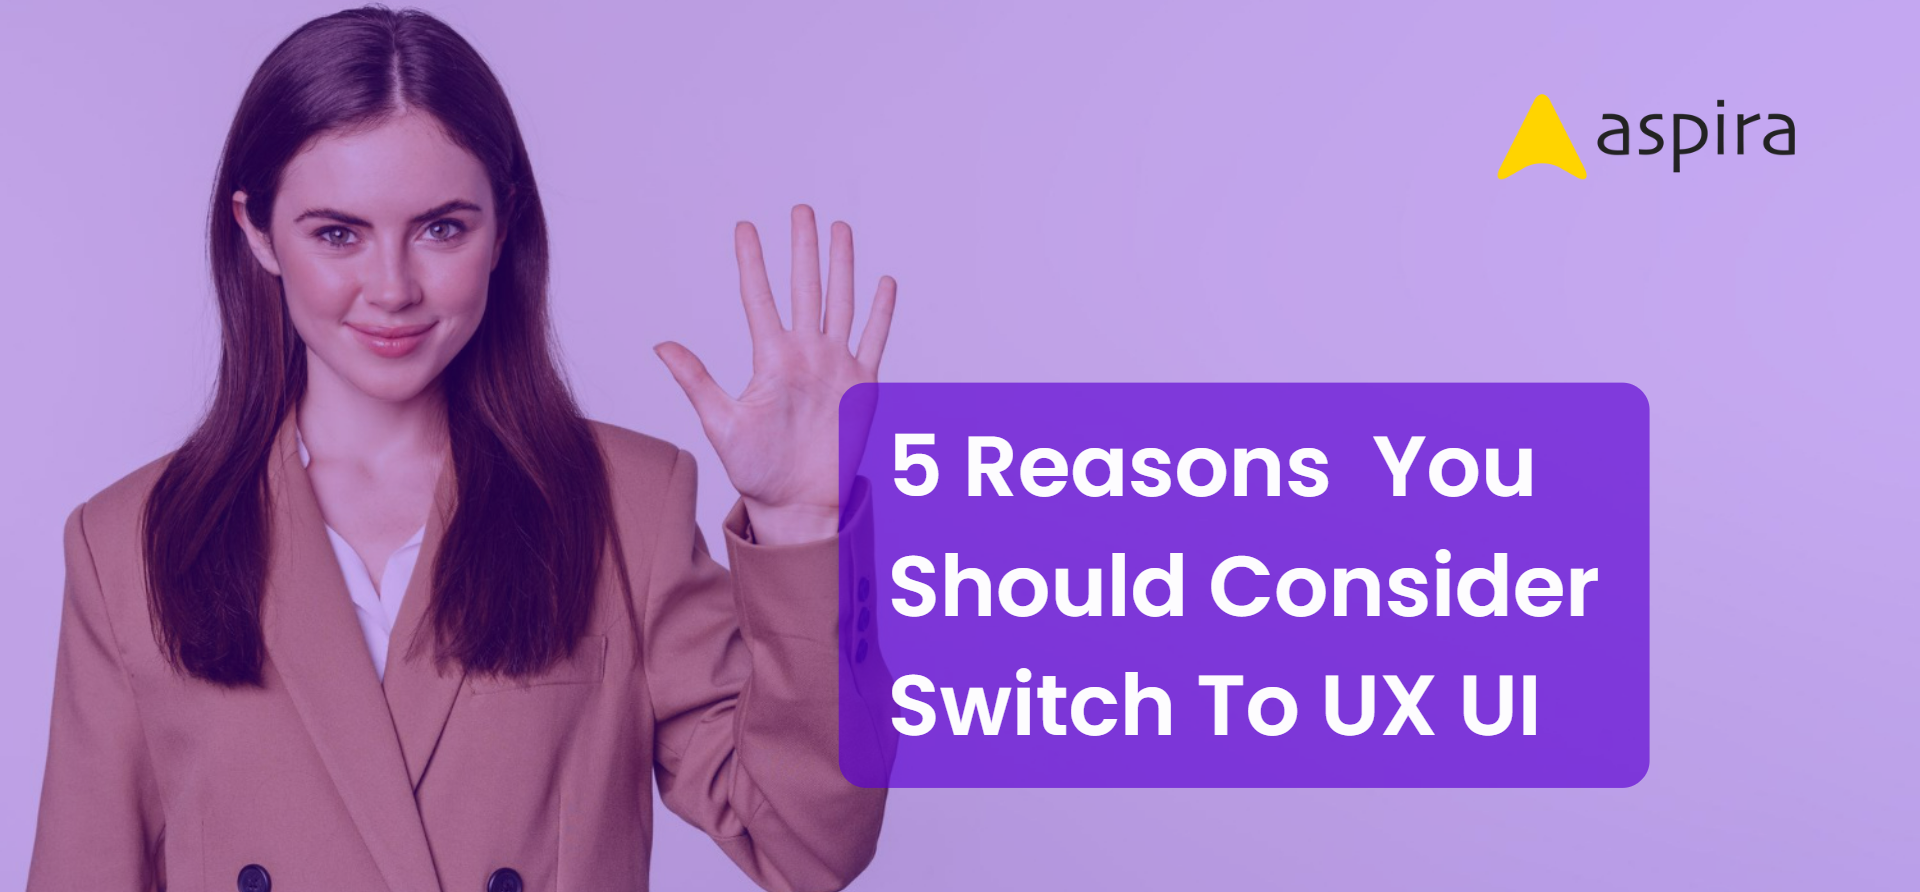 5 reasons you should consider career switch to UX UI Design